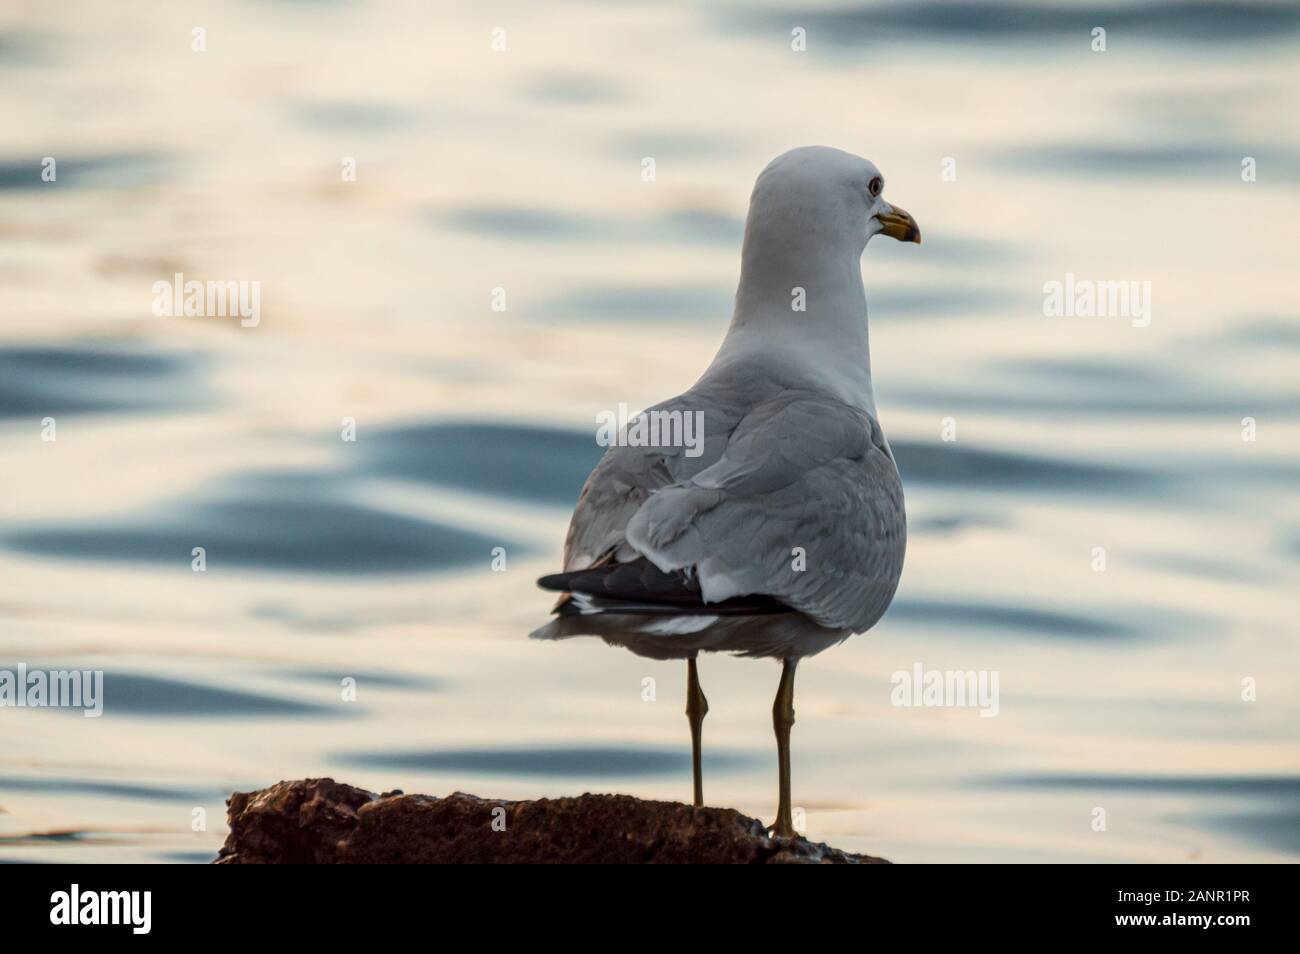 Seagull bird standing on shoreline at Lake Michigan with shallow focus. Stock Photo